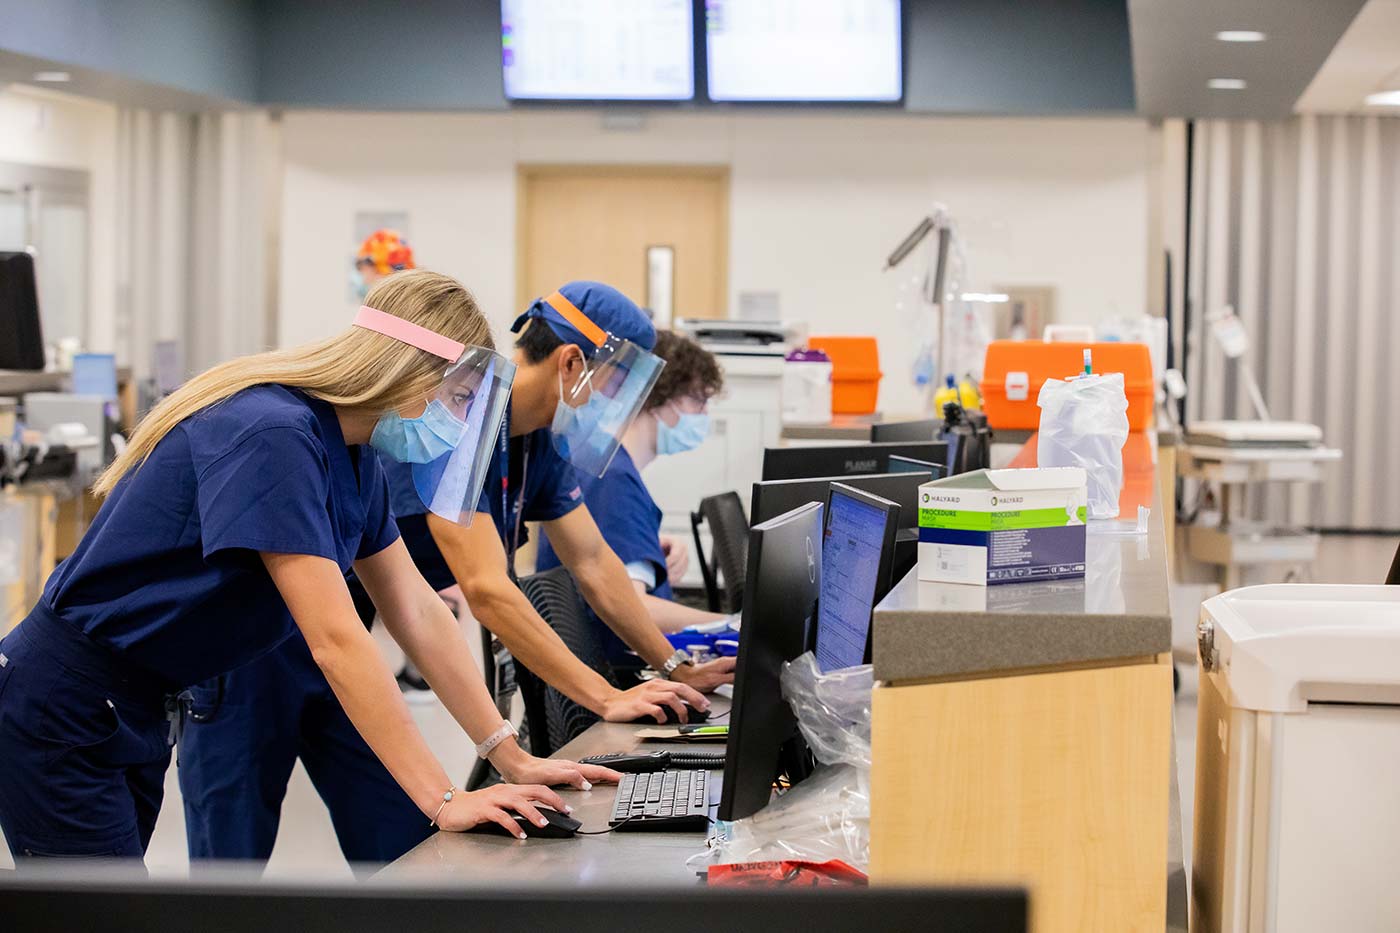 Medical personnel in scrubs and masks at computers